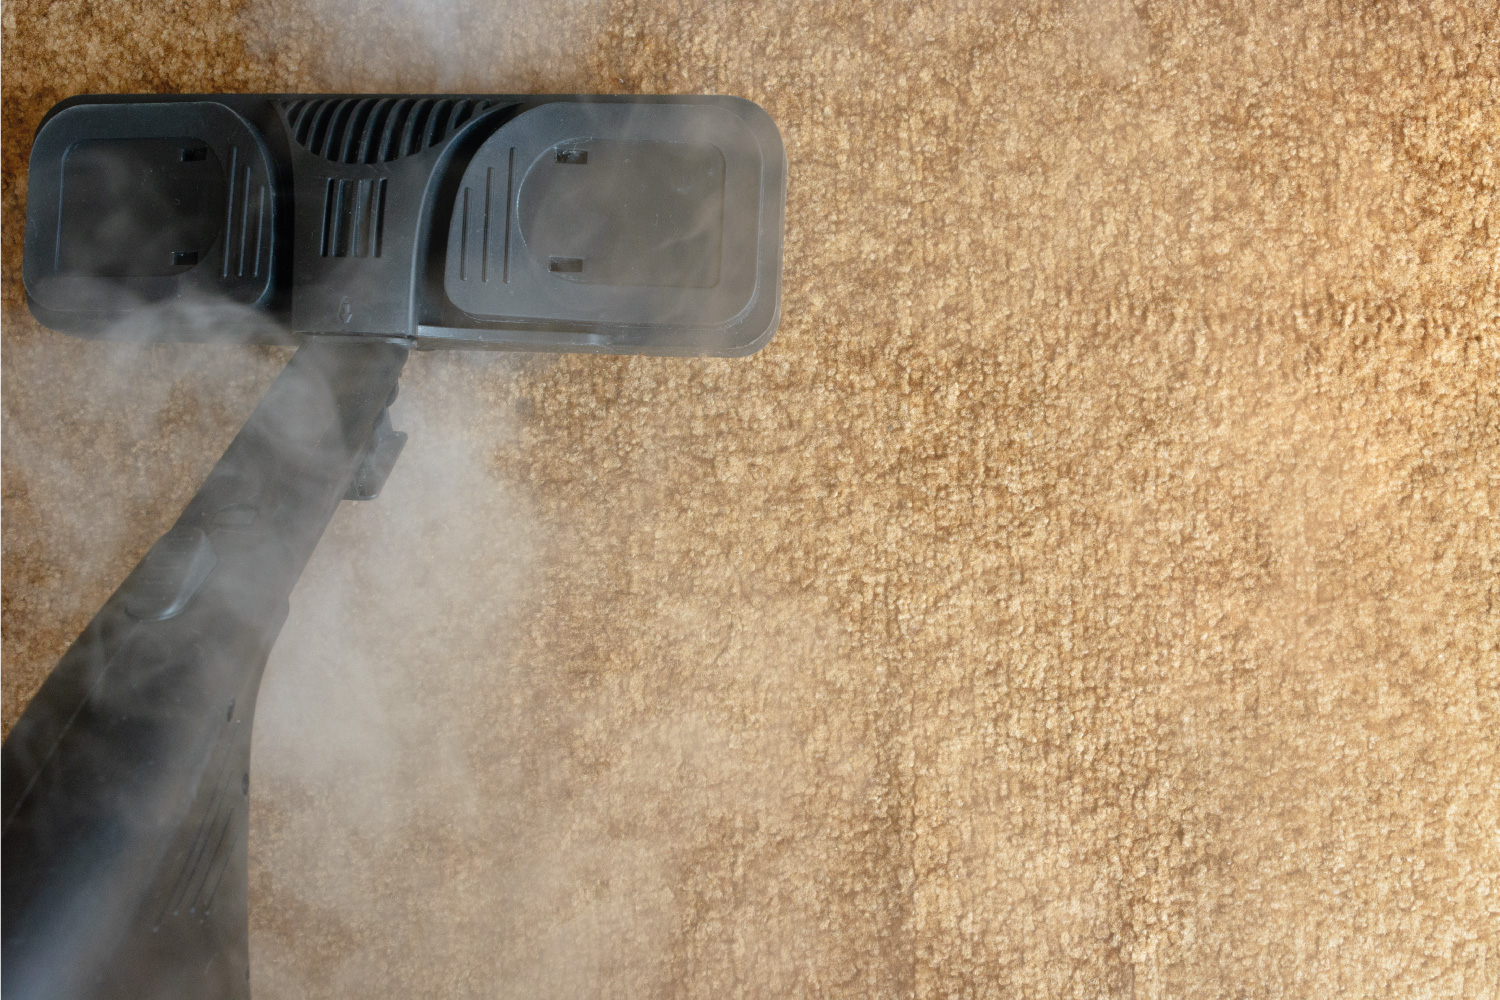 Equipment for carpet steam cleaning